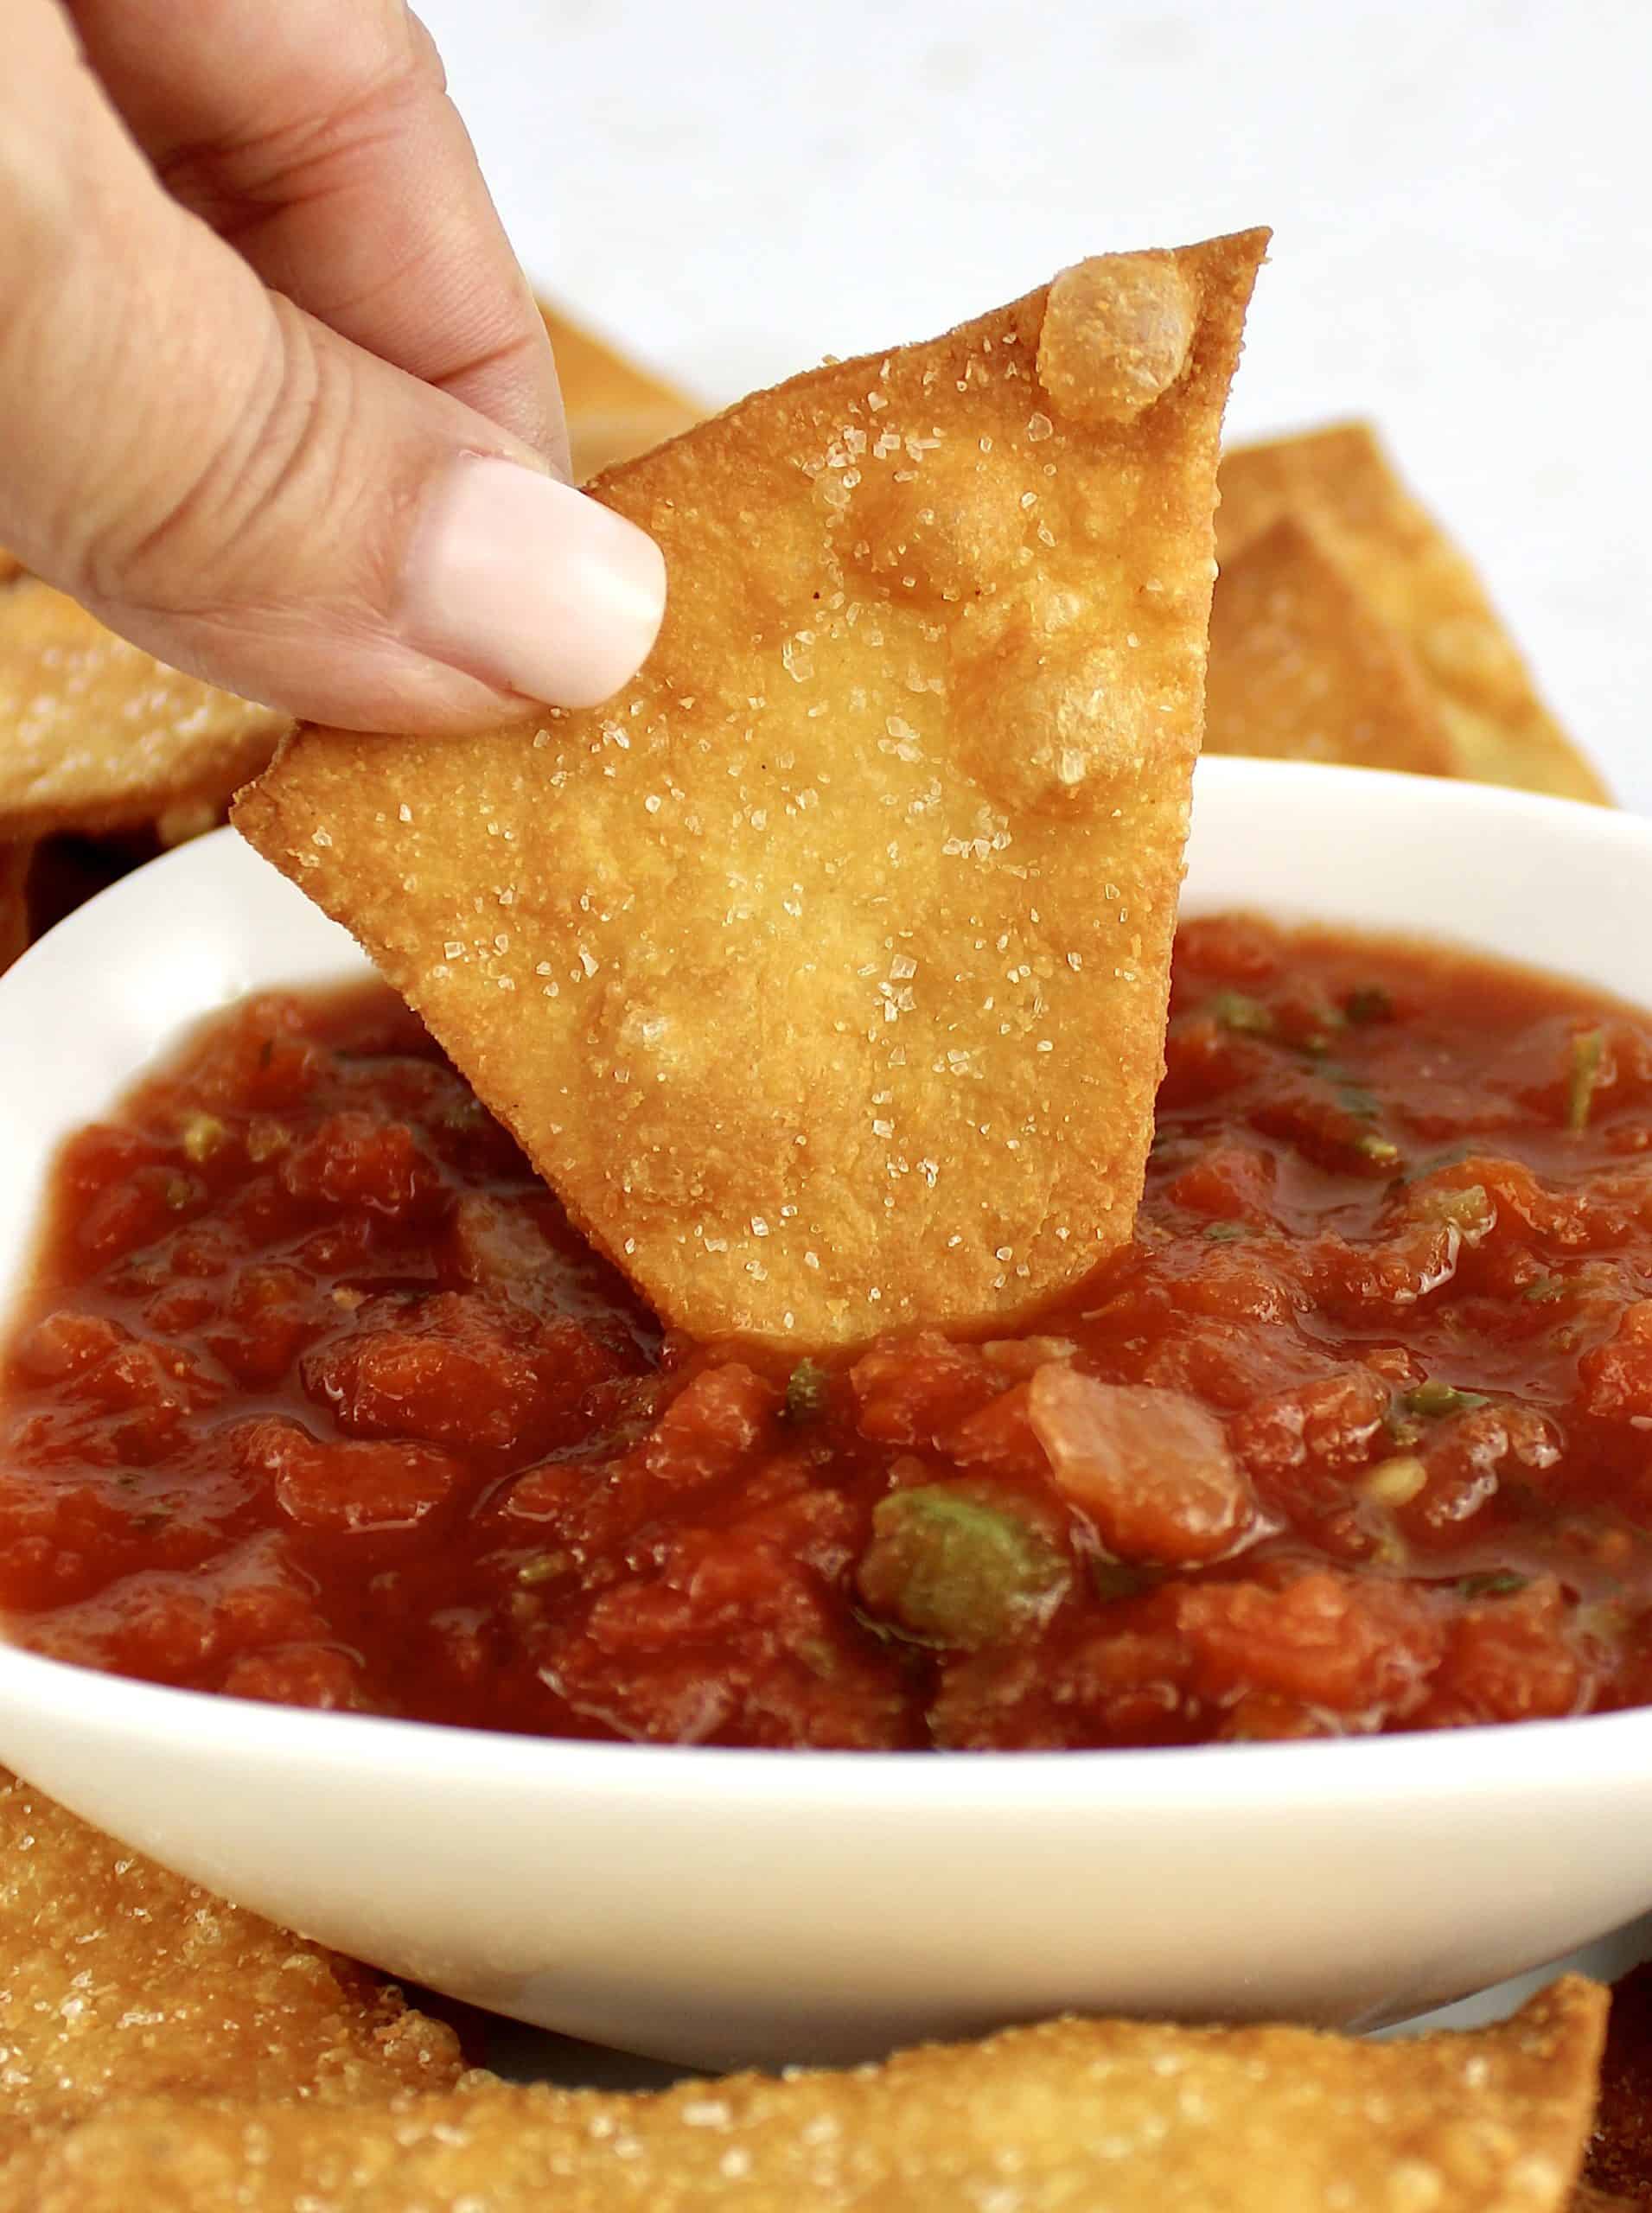 Keto Tortilla Chip being dipped into salsa in white bowl